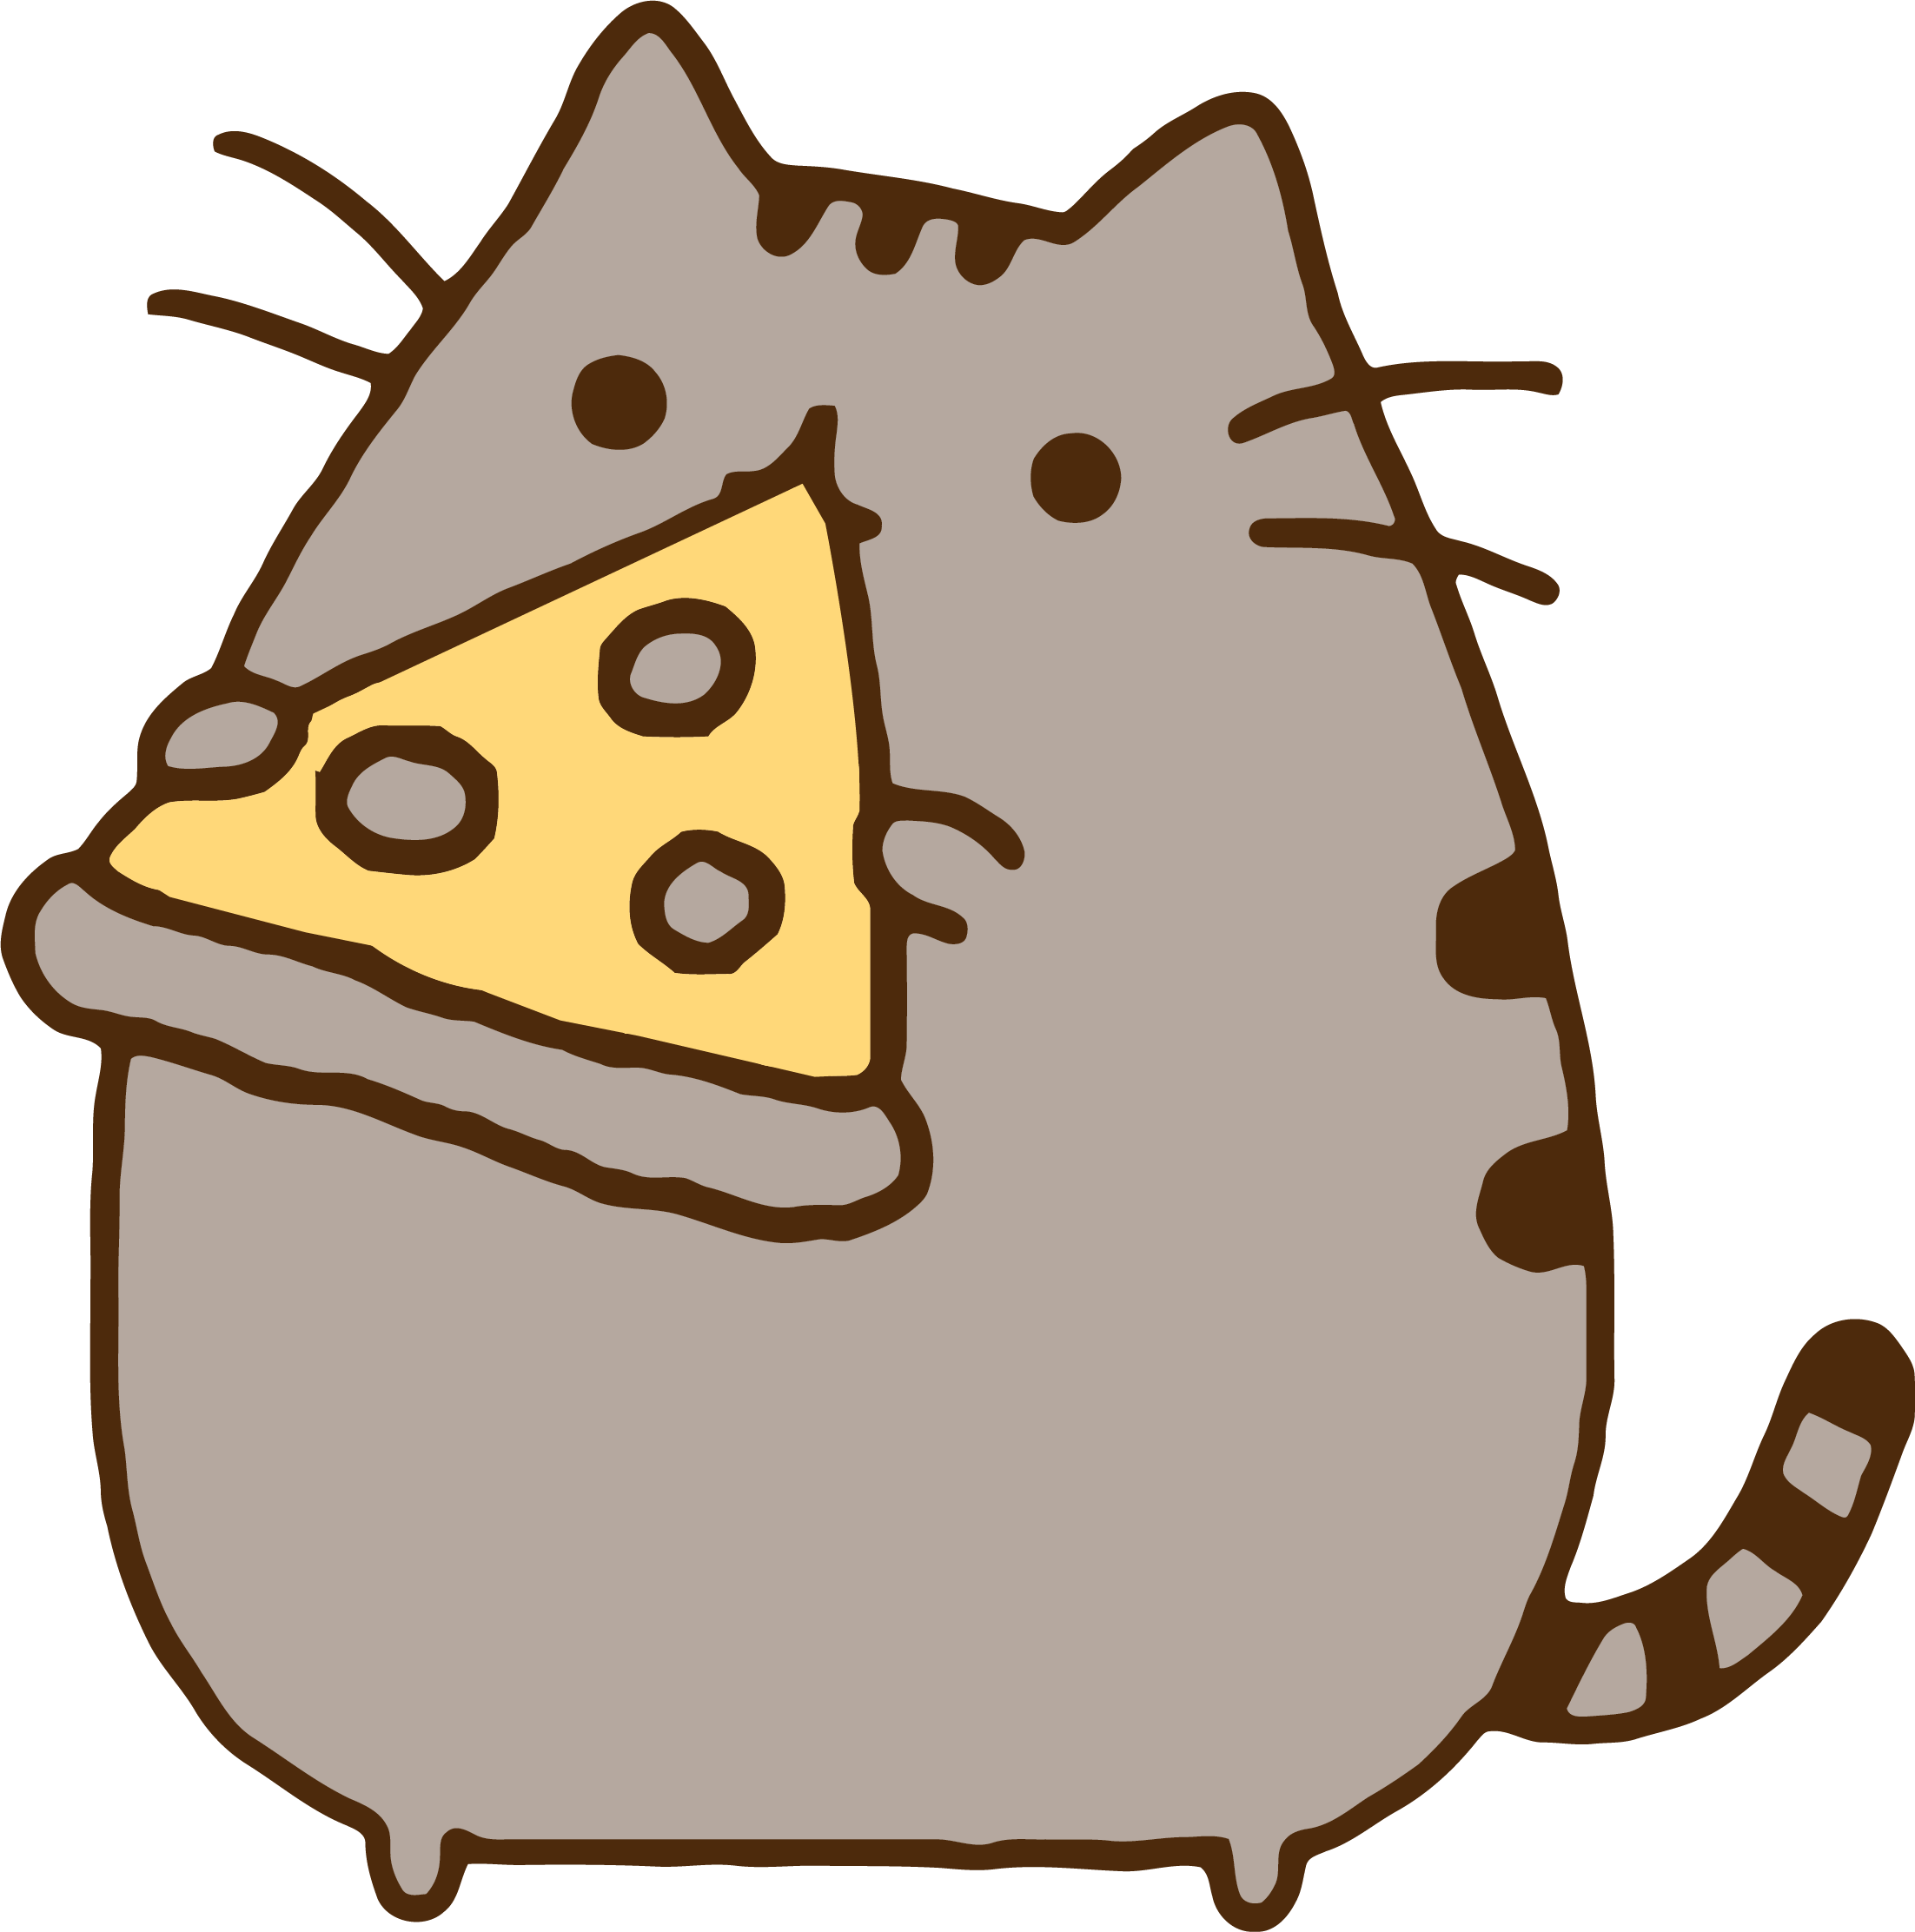 Head Medium Pusheen Sized To Cats Small PNG Image